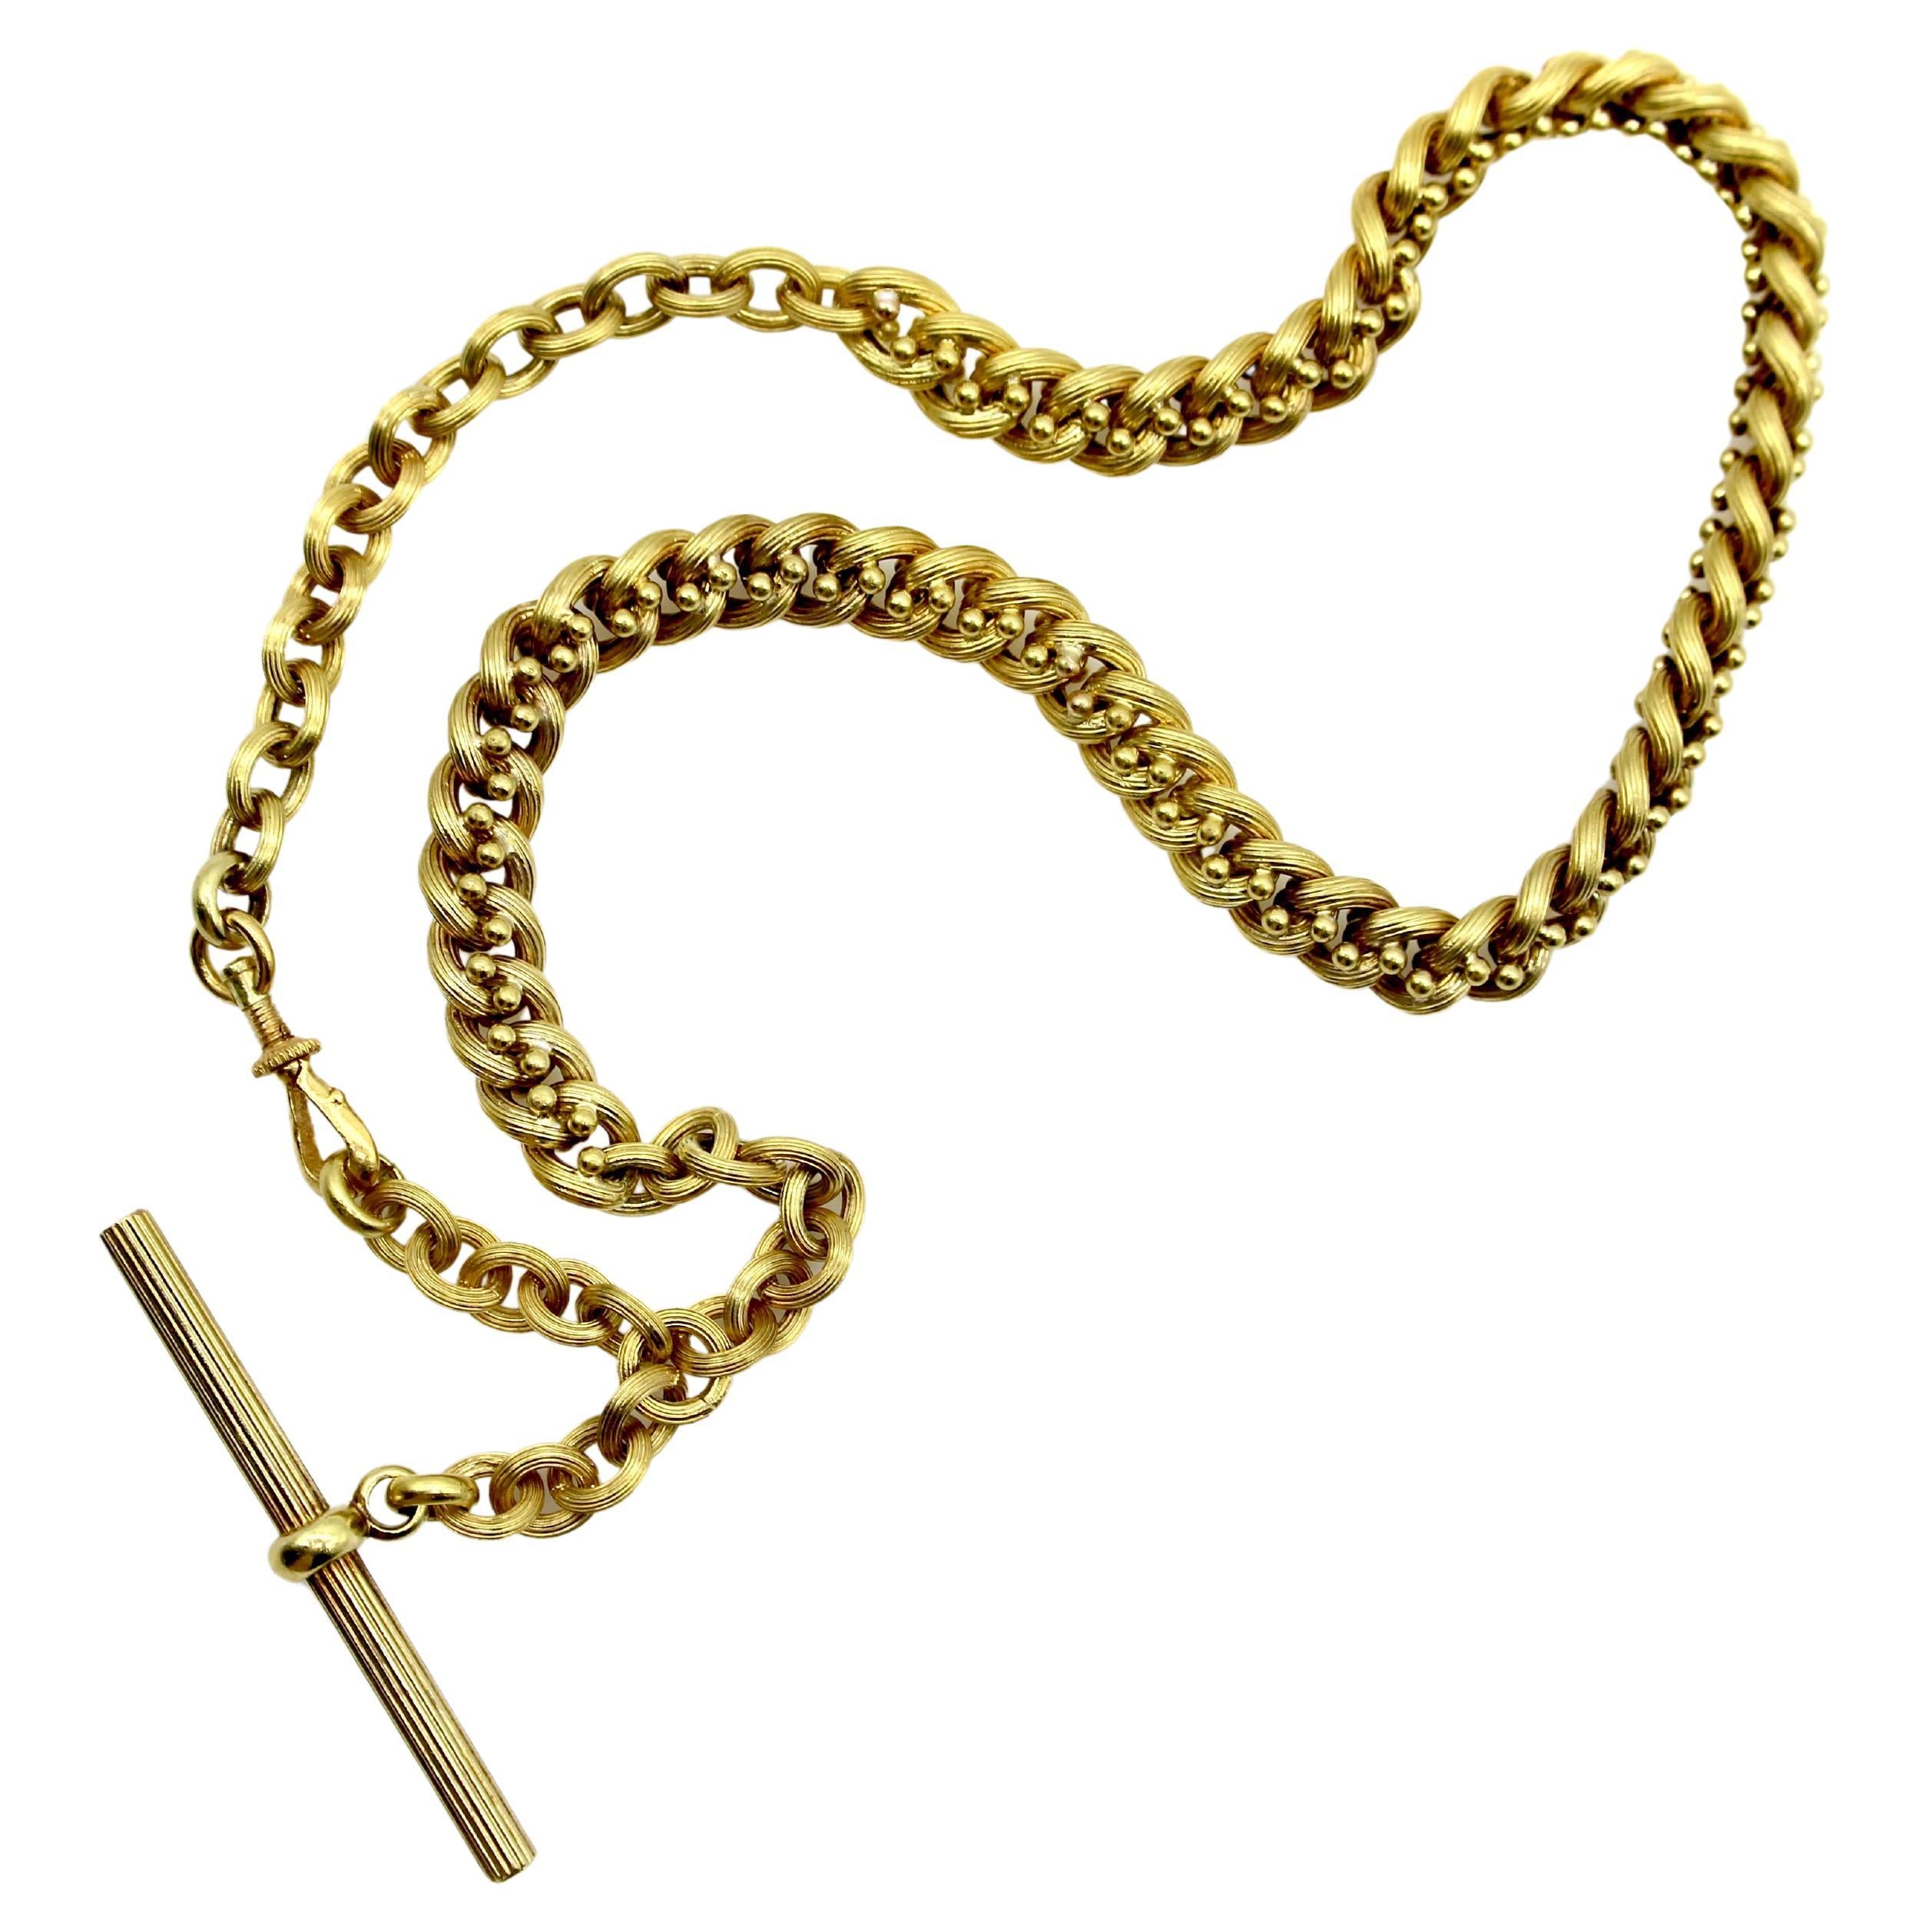 Victorian 14K Gold Pocket Watch Chain Necklace with T-Bar 